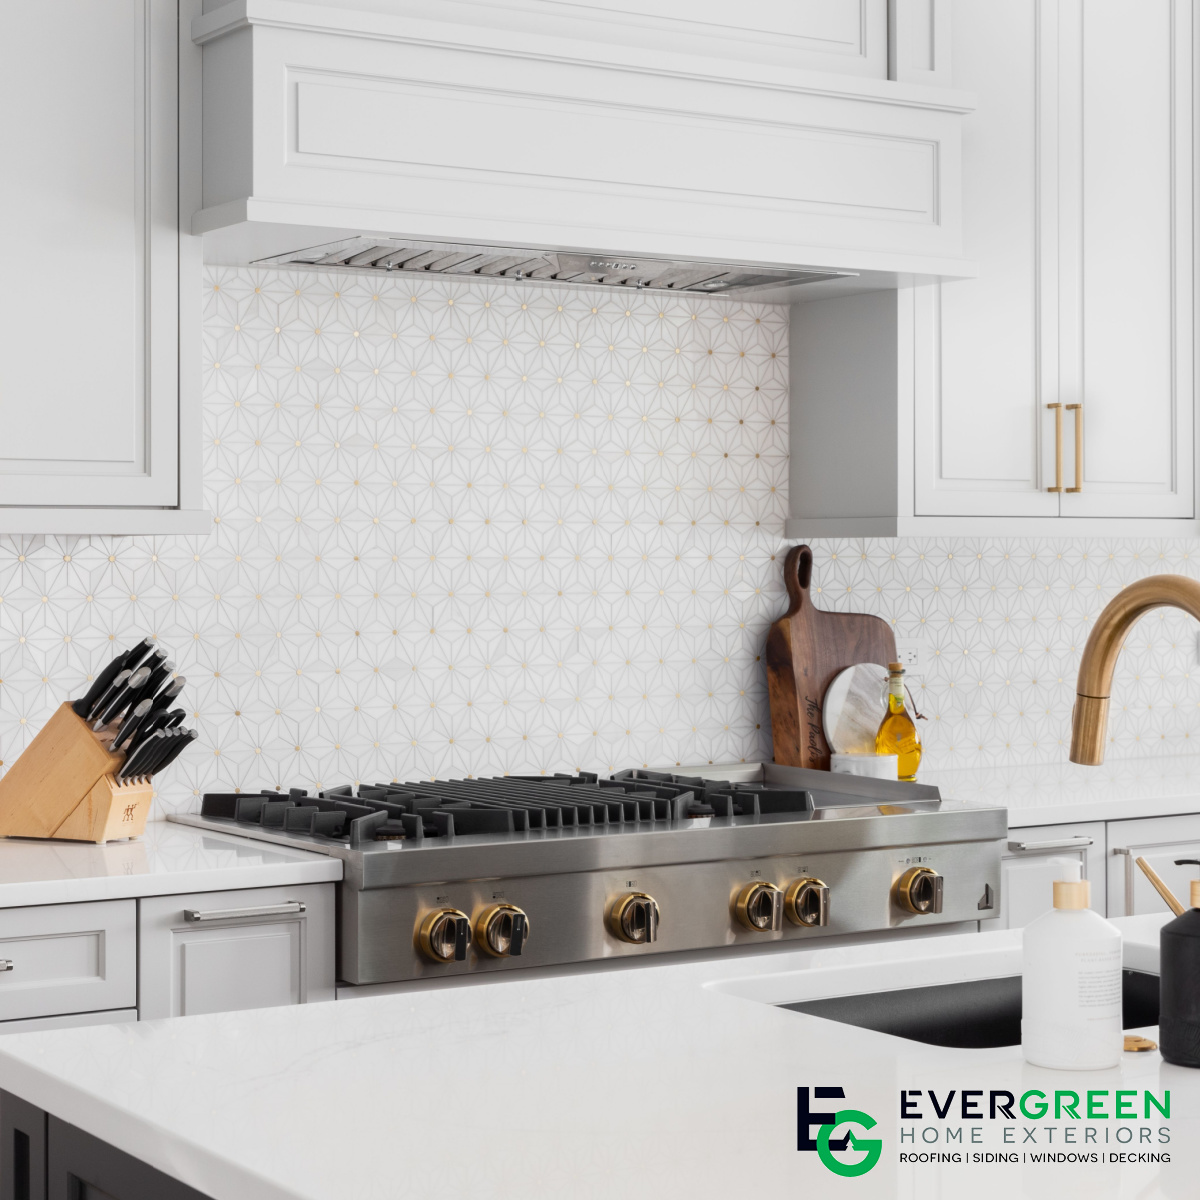 5 Reasons to Upgrade Your Kitchen with Evergreen Home Exteriors